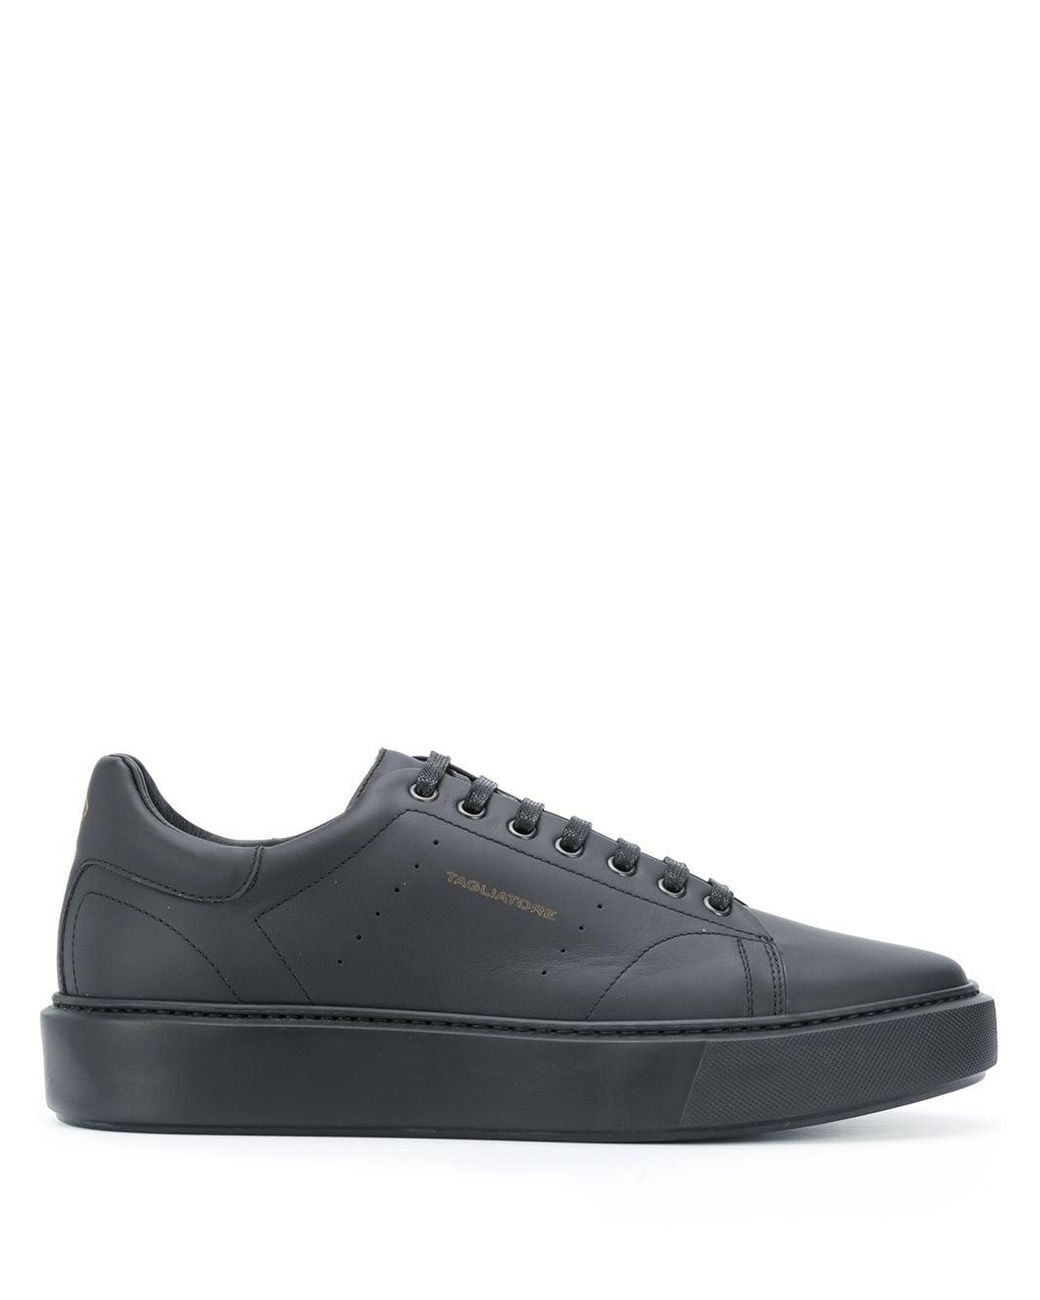 Tagliatore Leather Wade Low-top Sneakers in Black for Men - Lyst